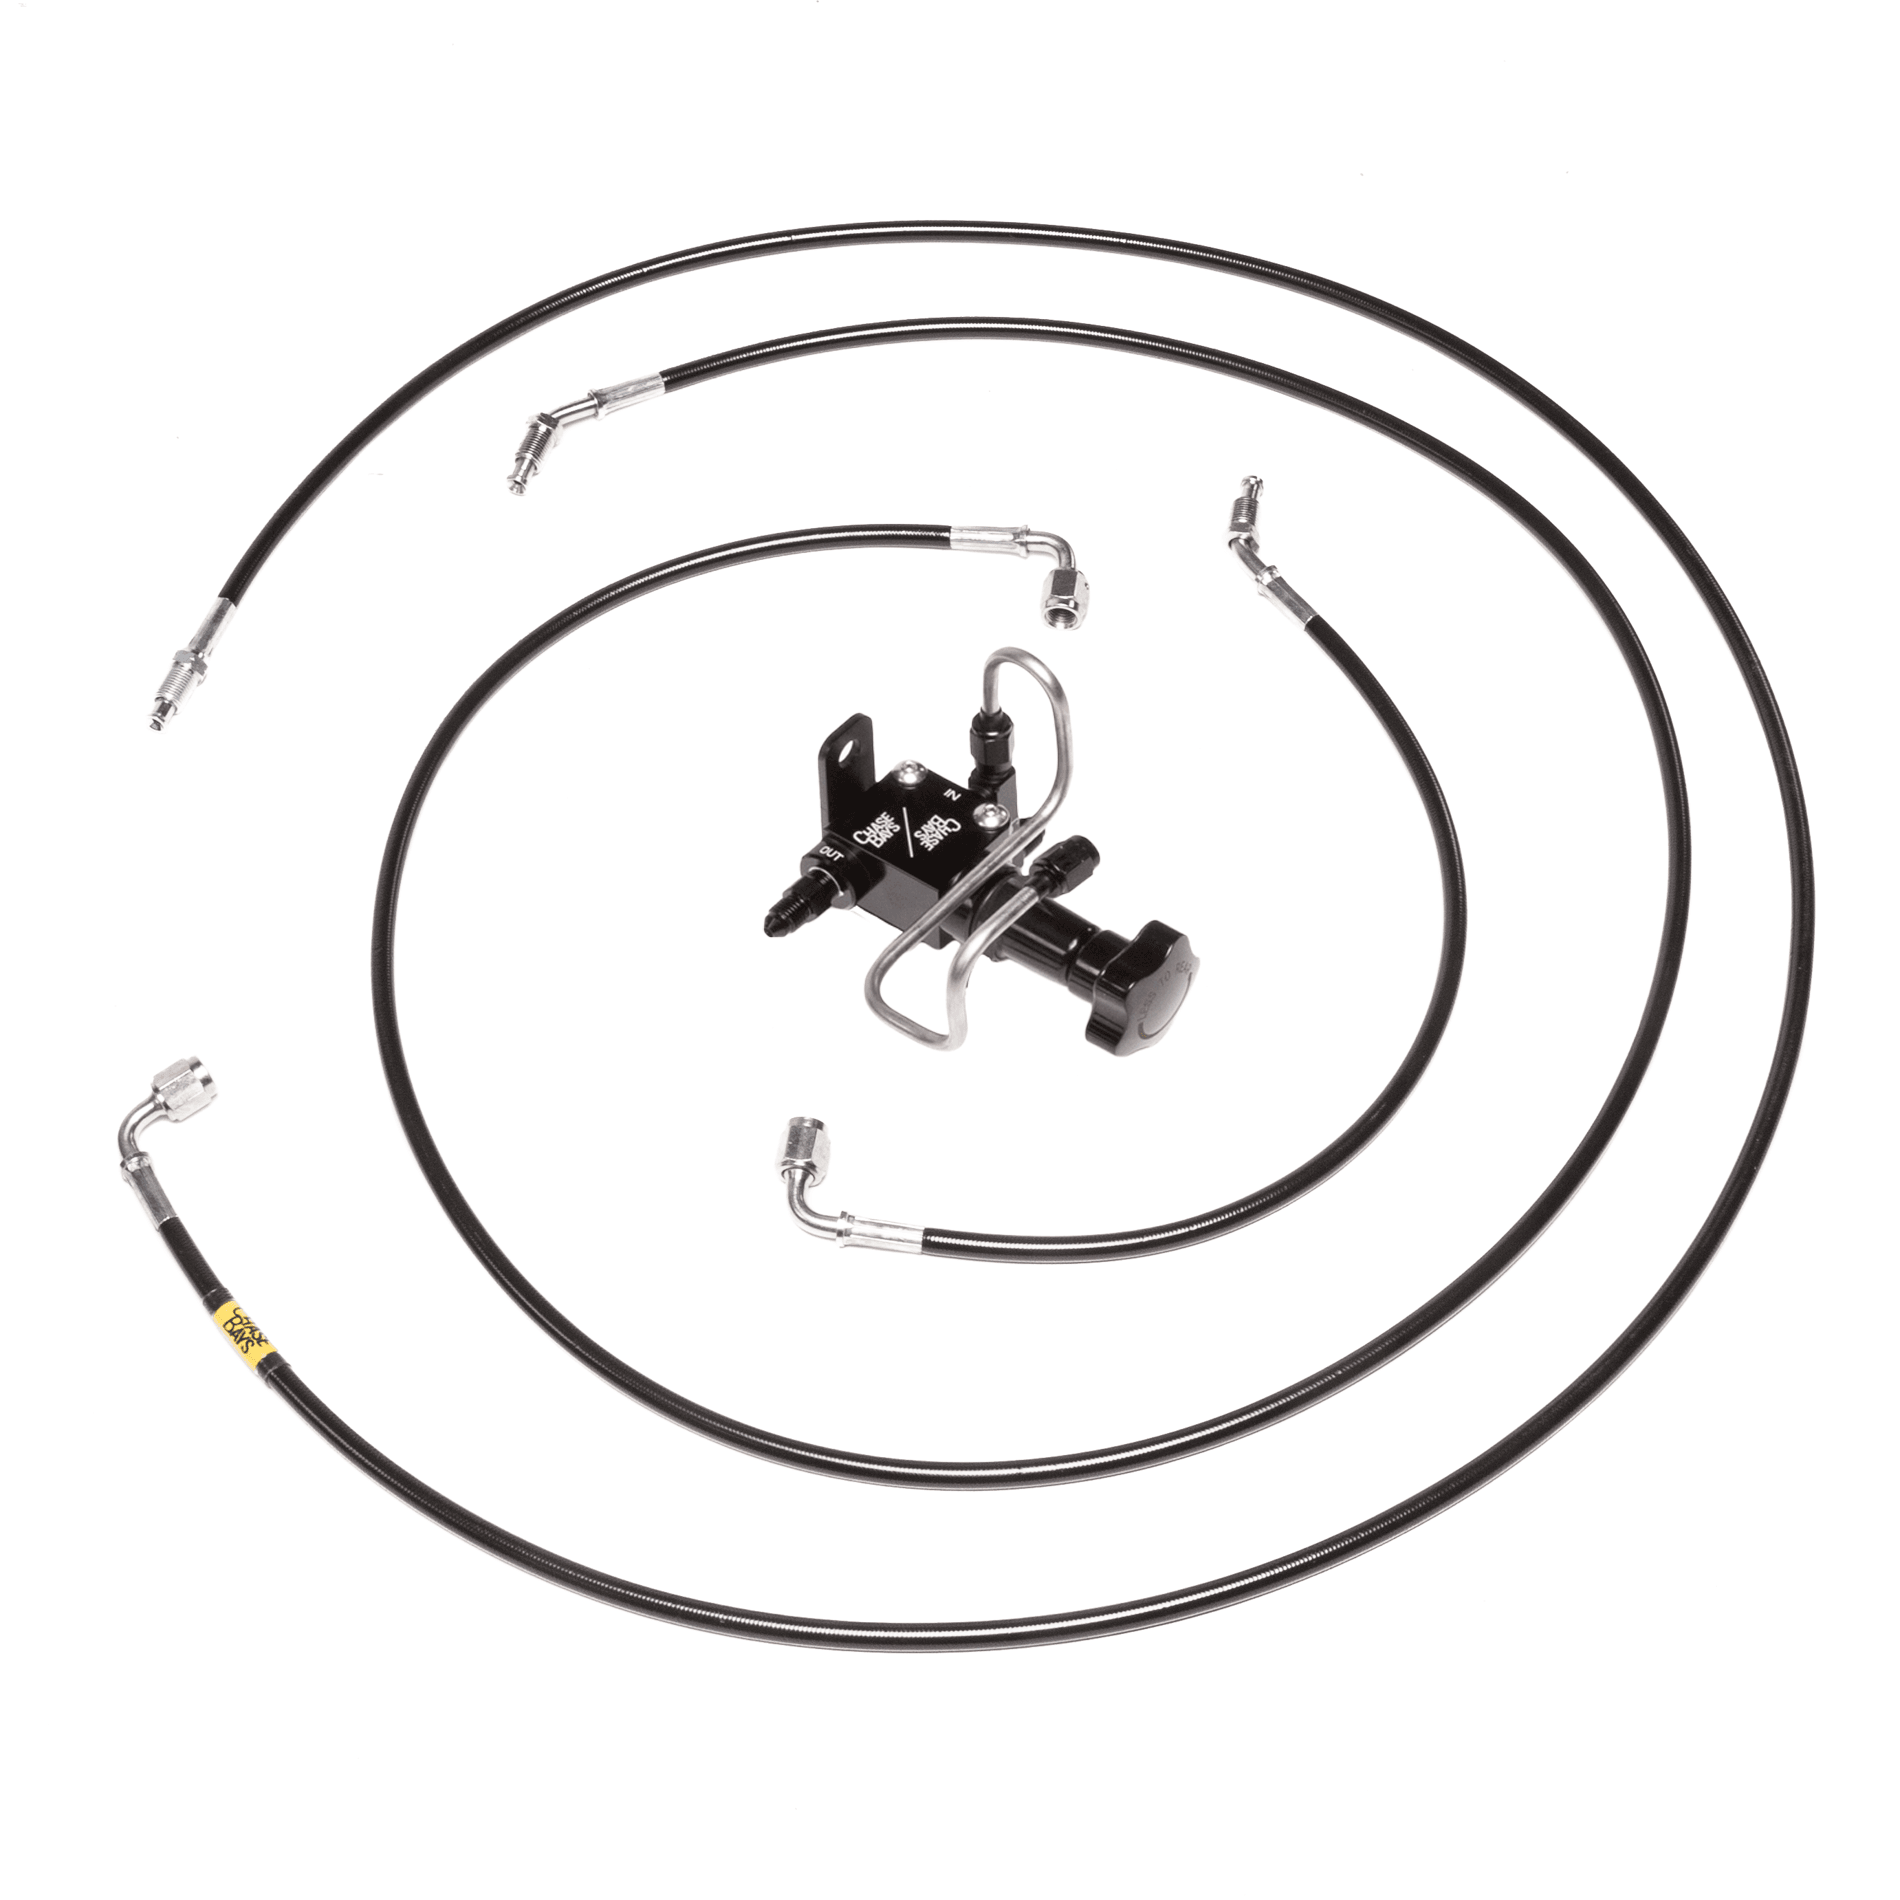 Chase Bays Fuel Line Kit - Nissan 240sx S13 / S14 / S15 with